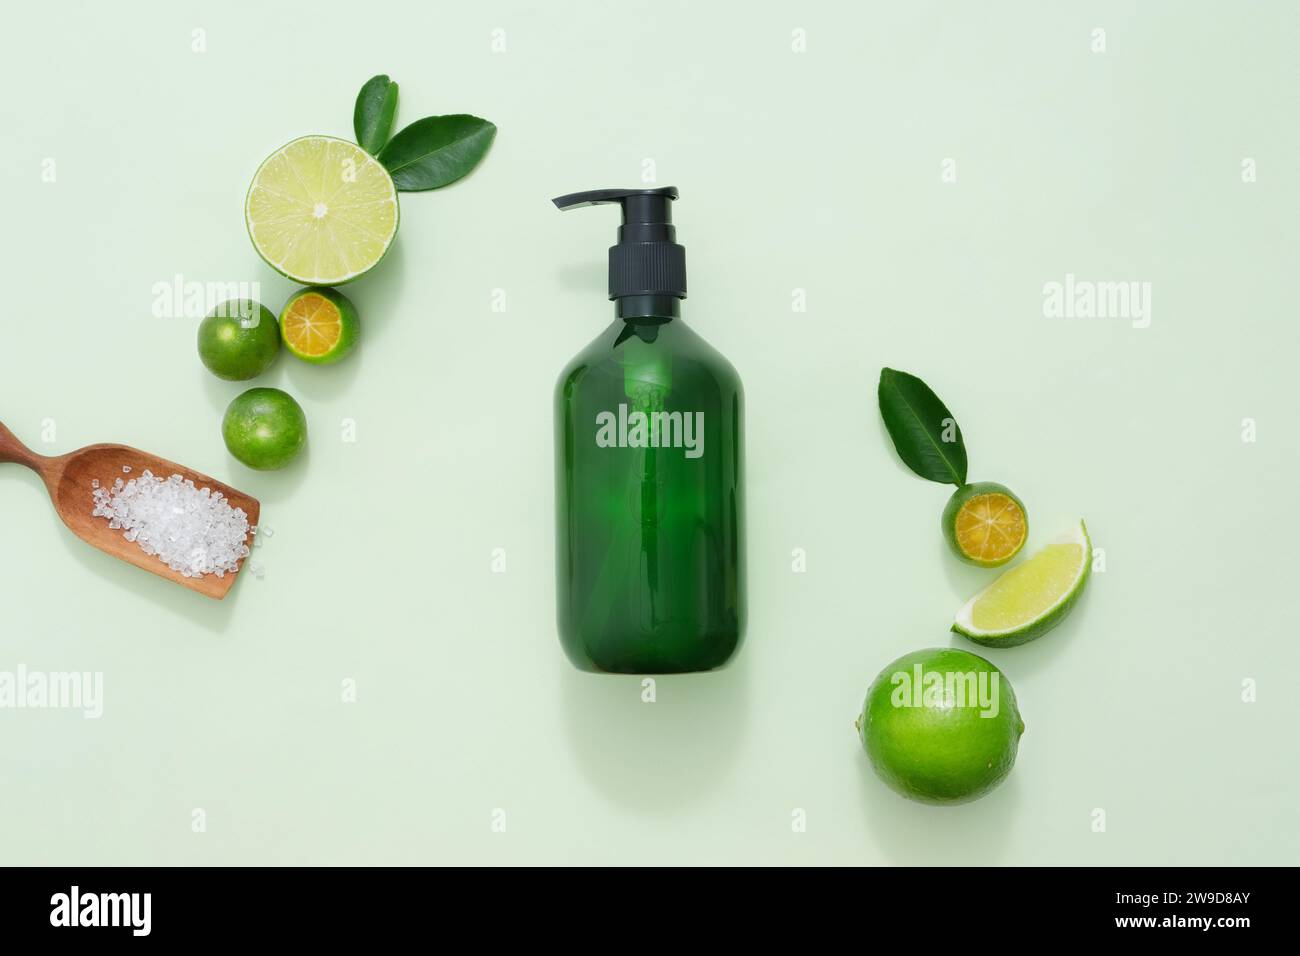 A pump bottle container shampoo or shower gel decorated with slices of lime and kumquat, green leaves and wooden tray of bath salt on green pastel bac Stock Photo